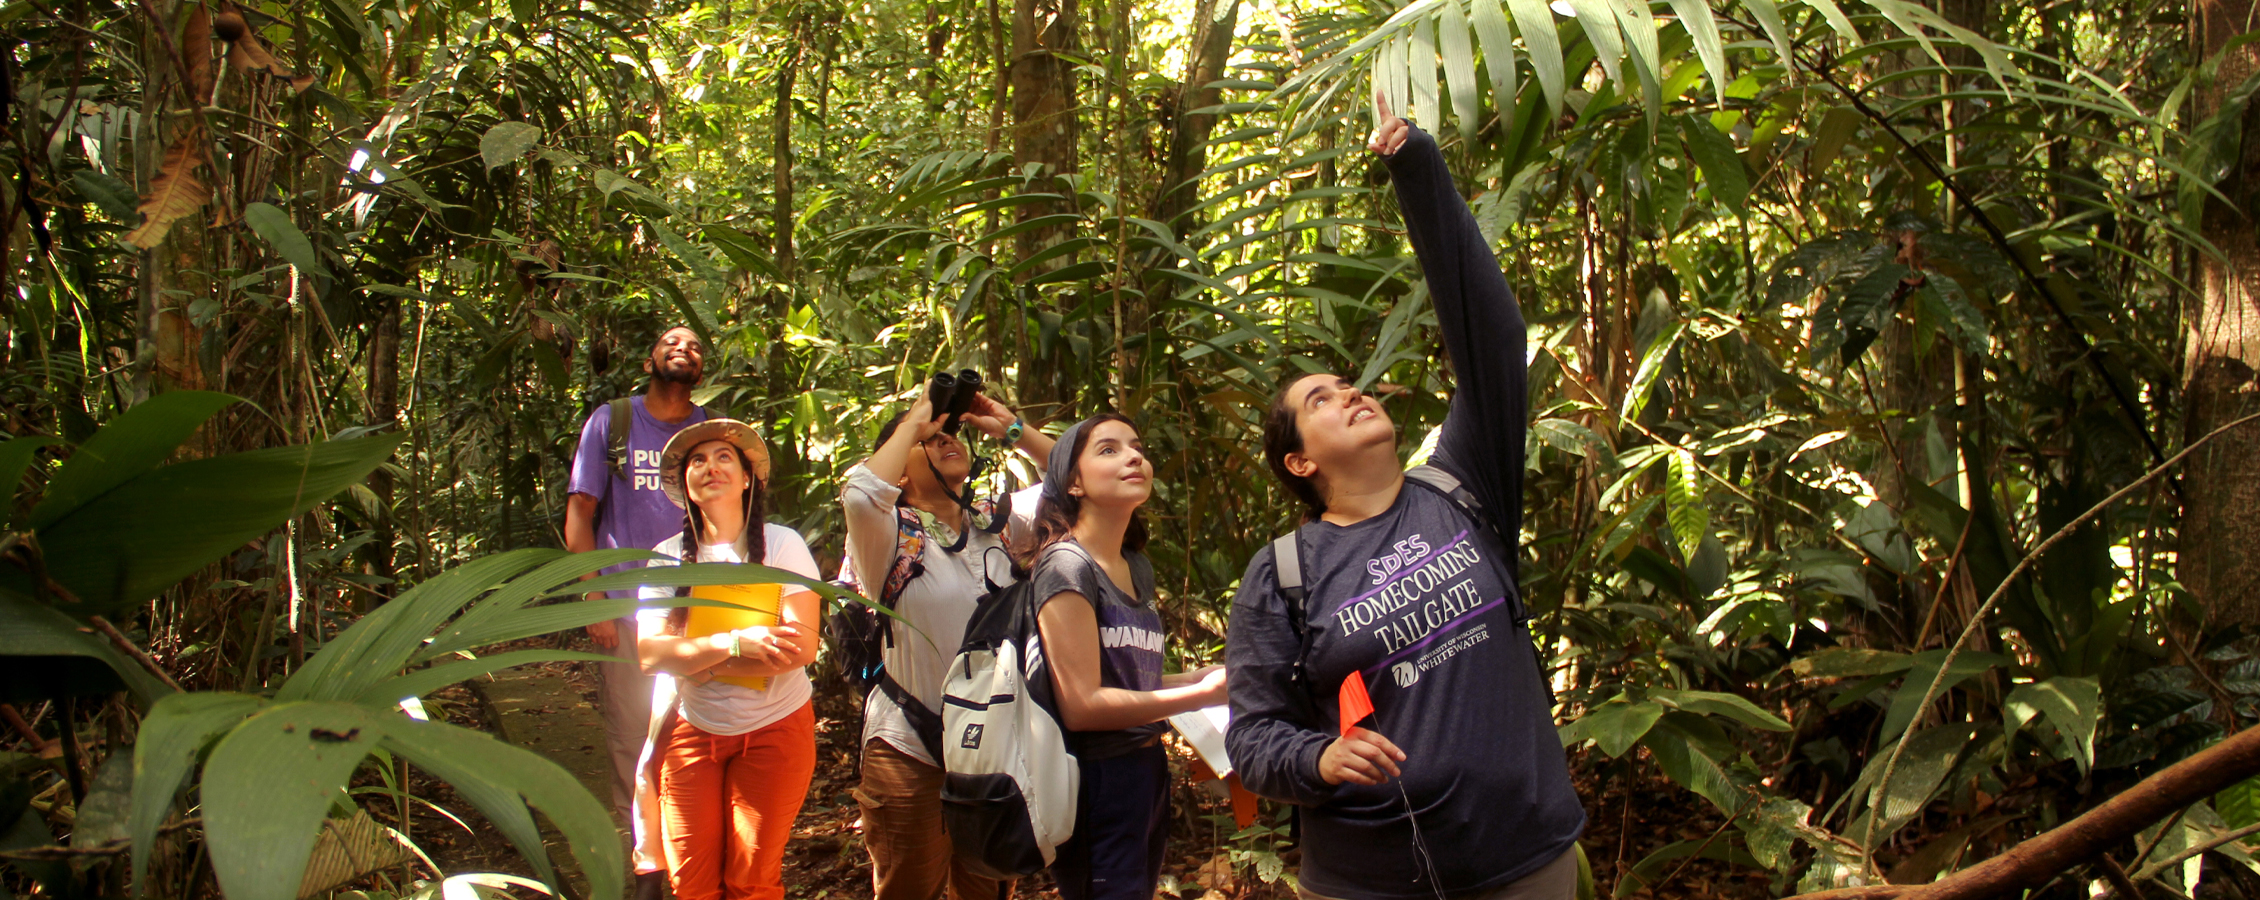 A faculty member leads a group of students through a jungle.